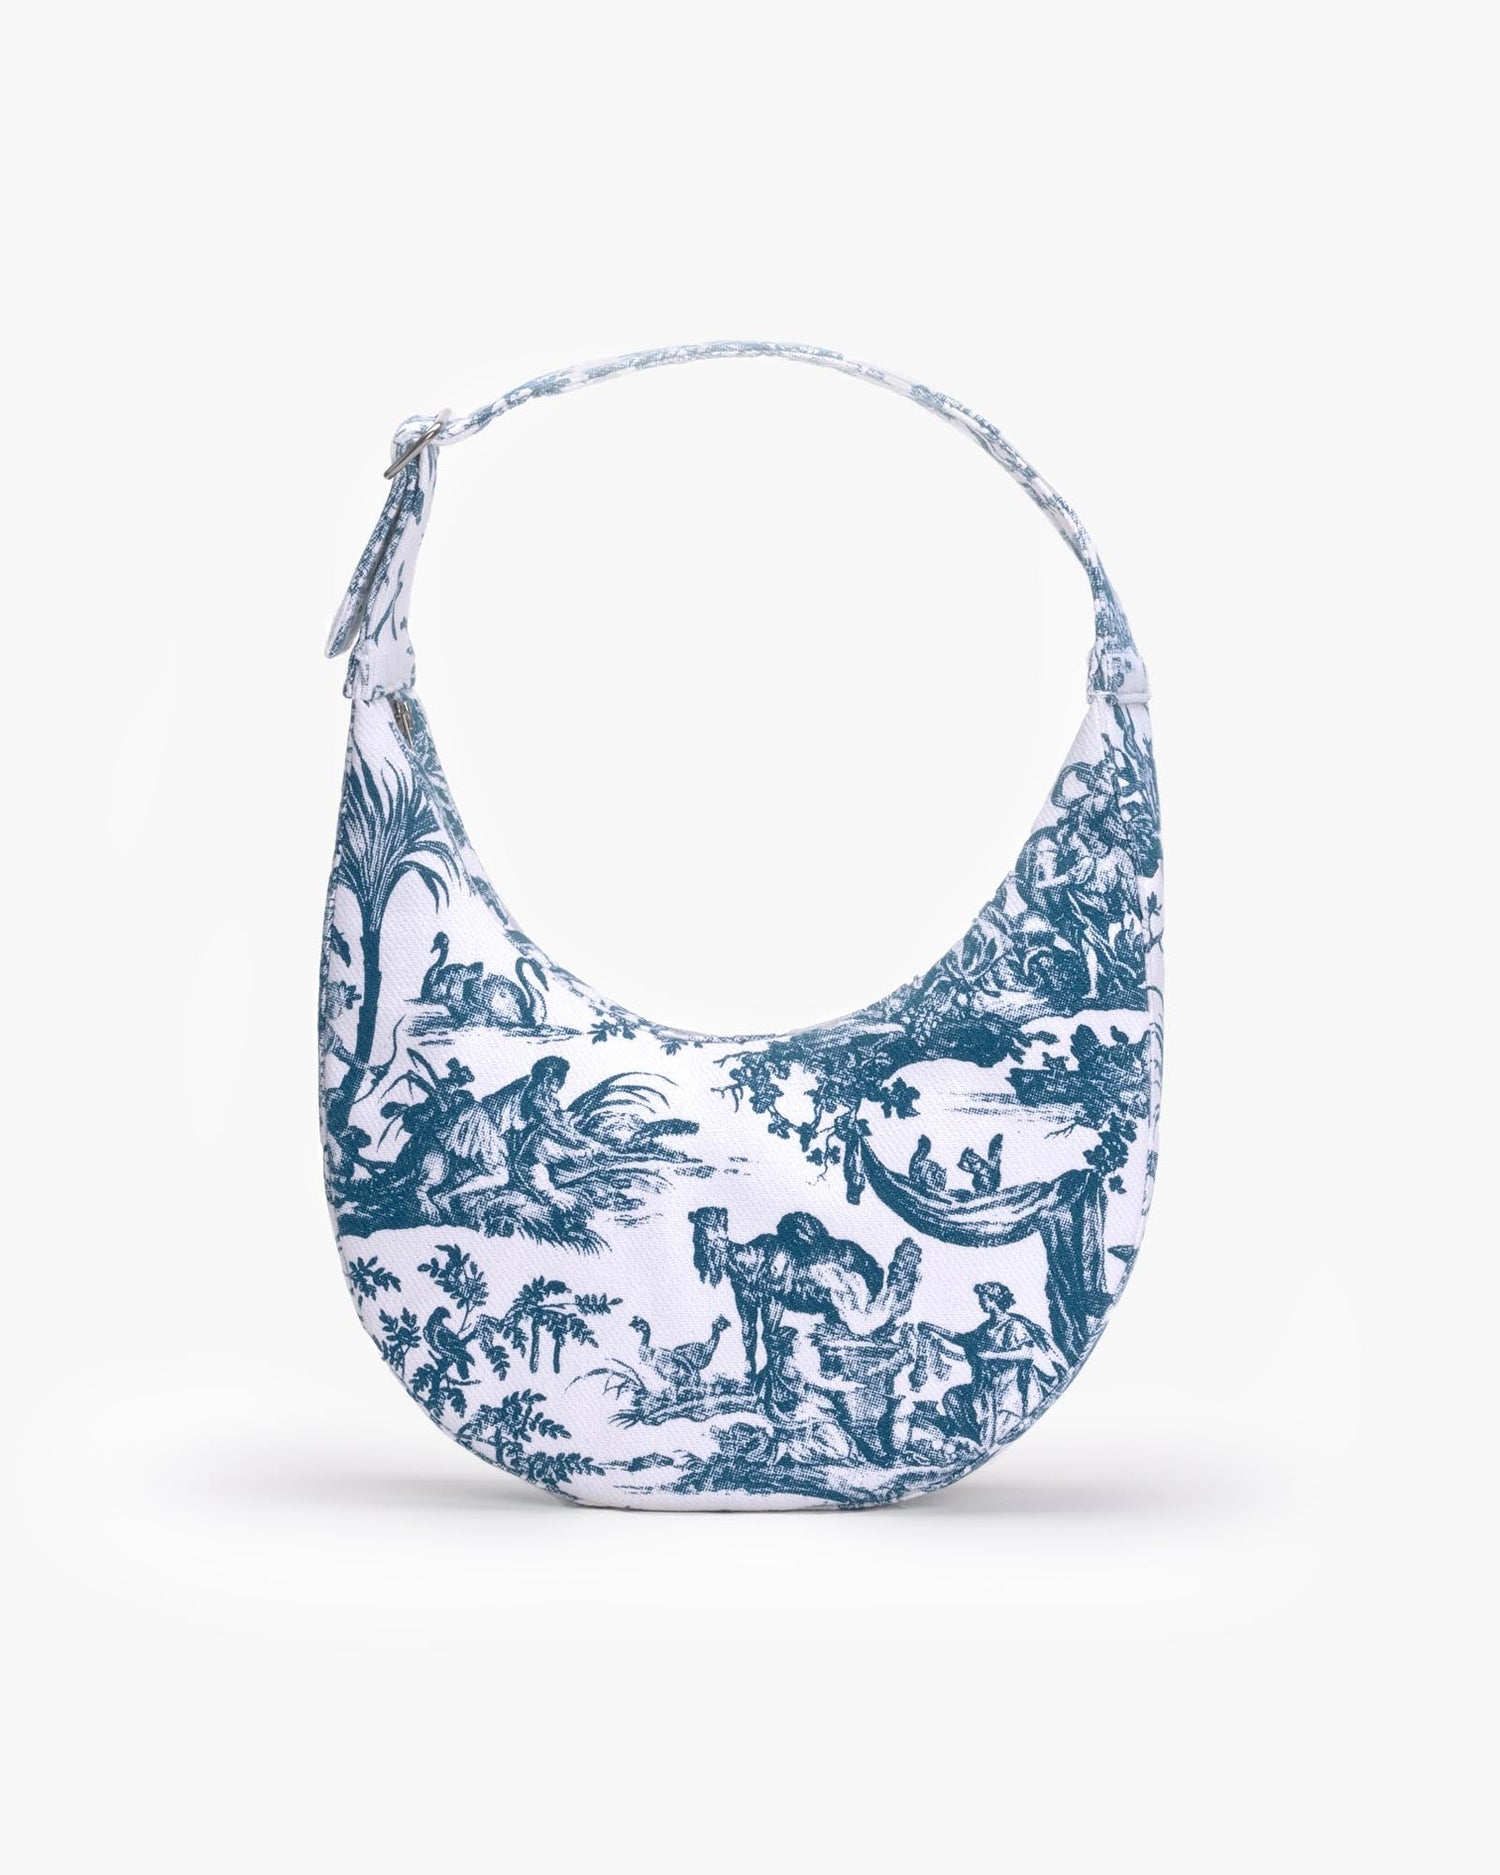 The Moon Bag - Riverine: Eco-Friendly and Sustainable The Moon Bag by ecoright